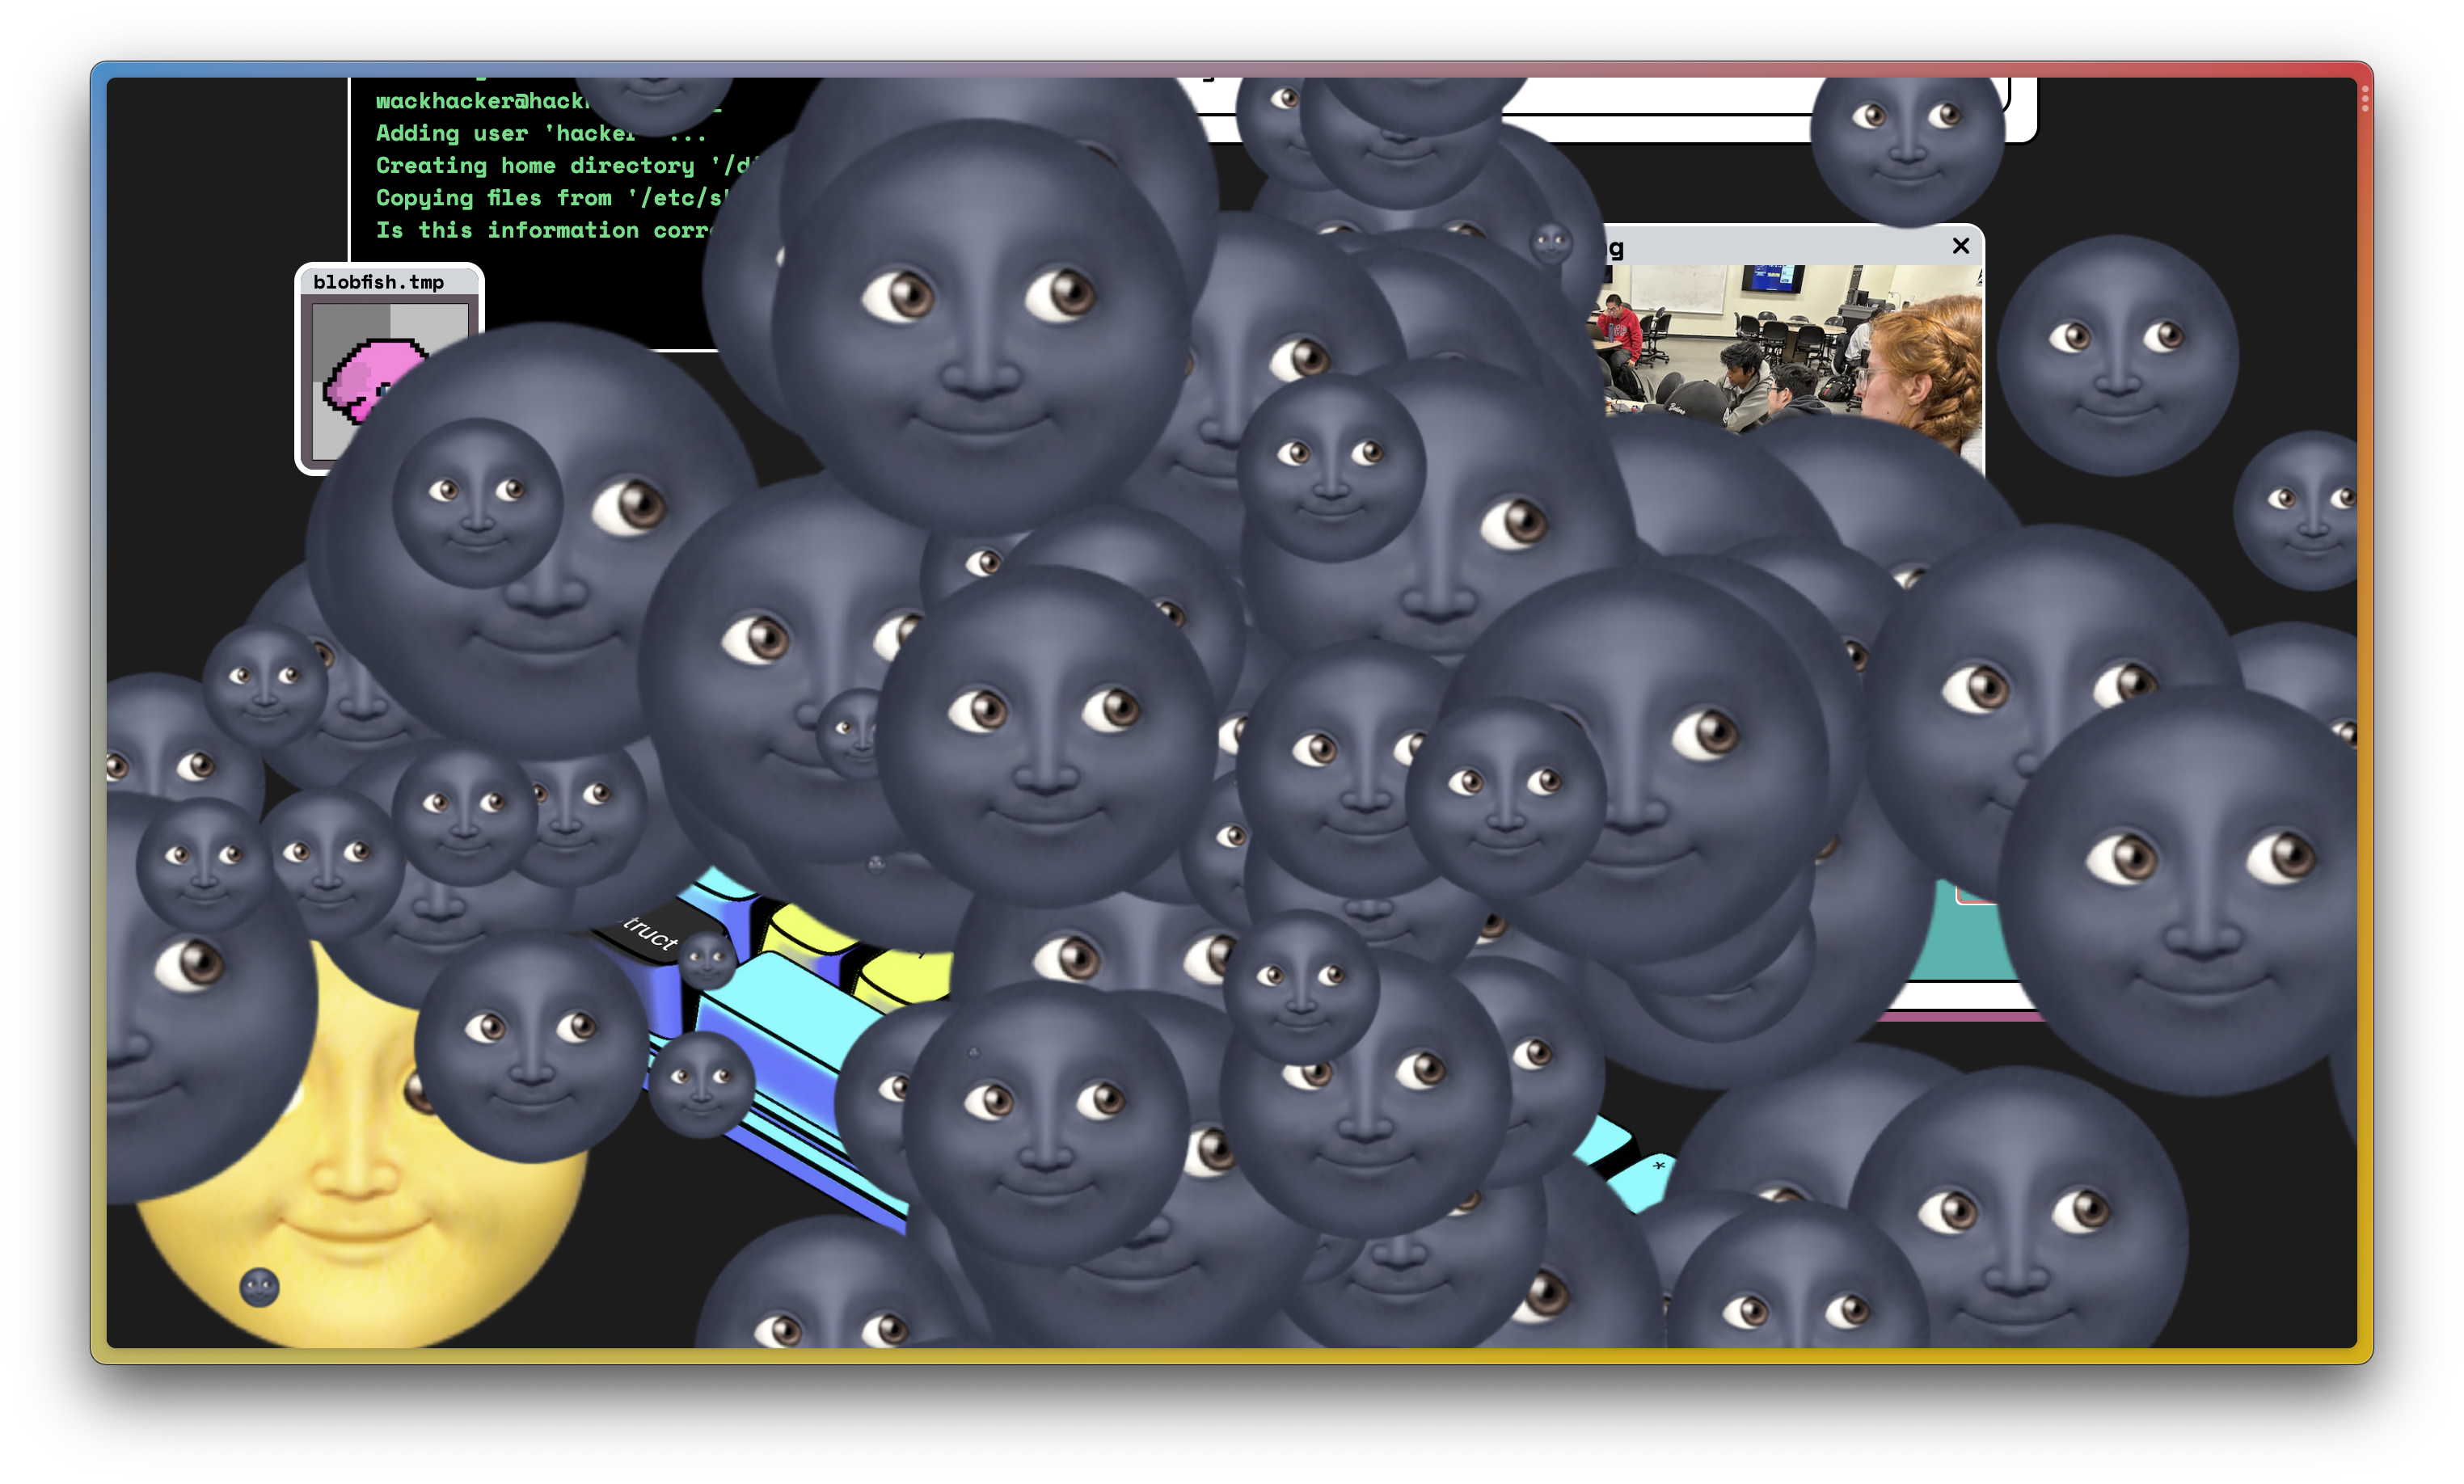 screenshot of a website covered in moon face emojis